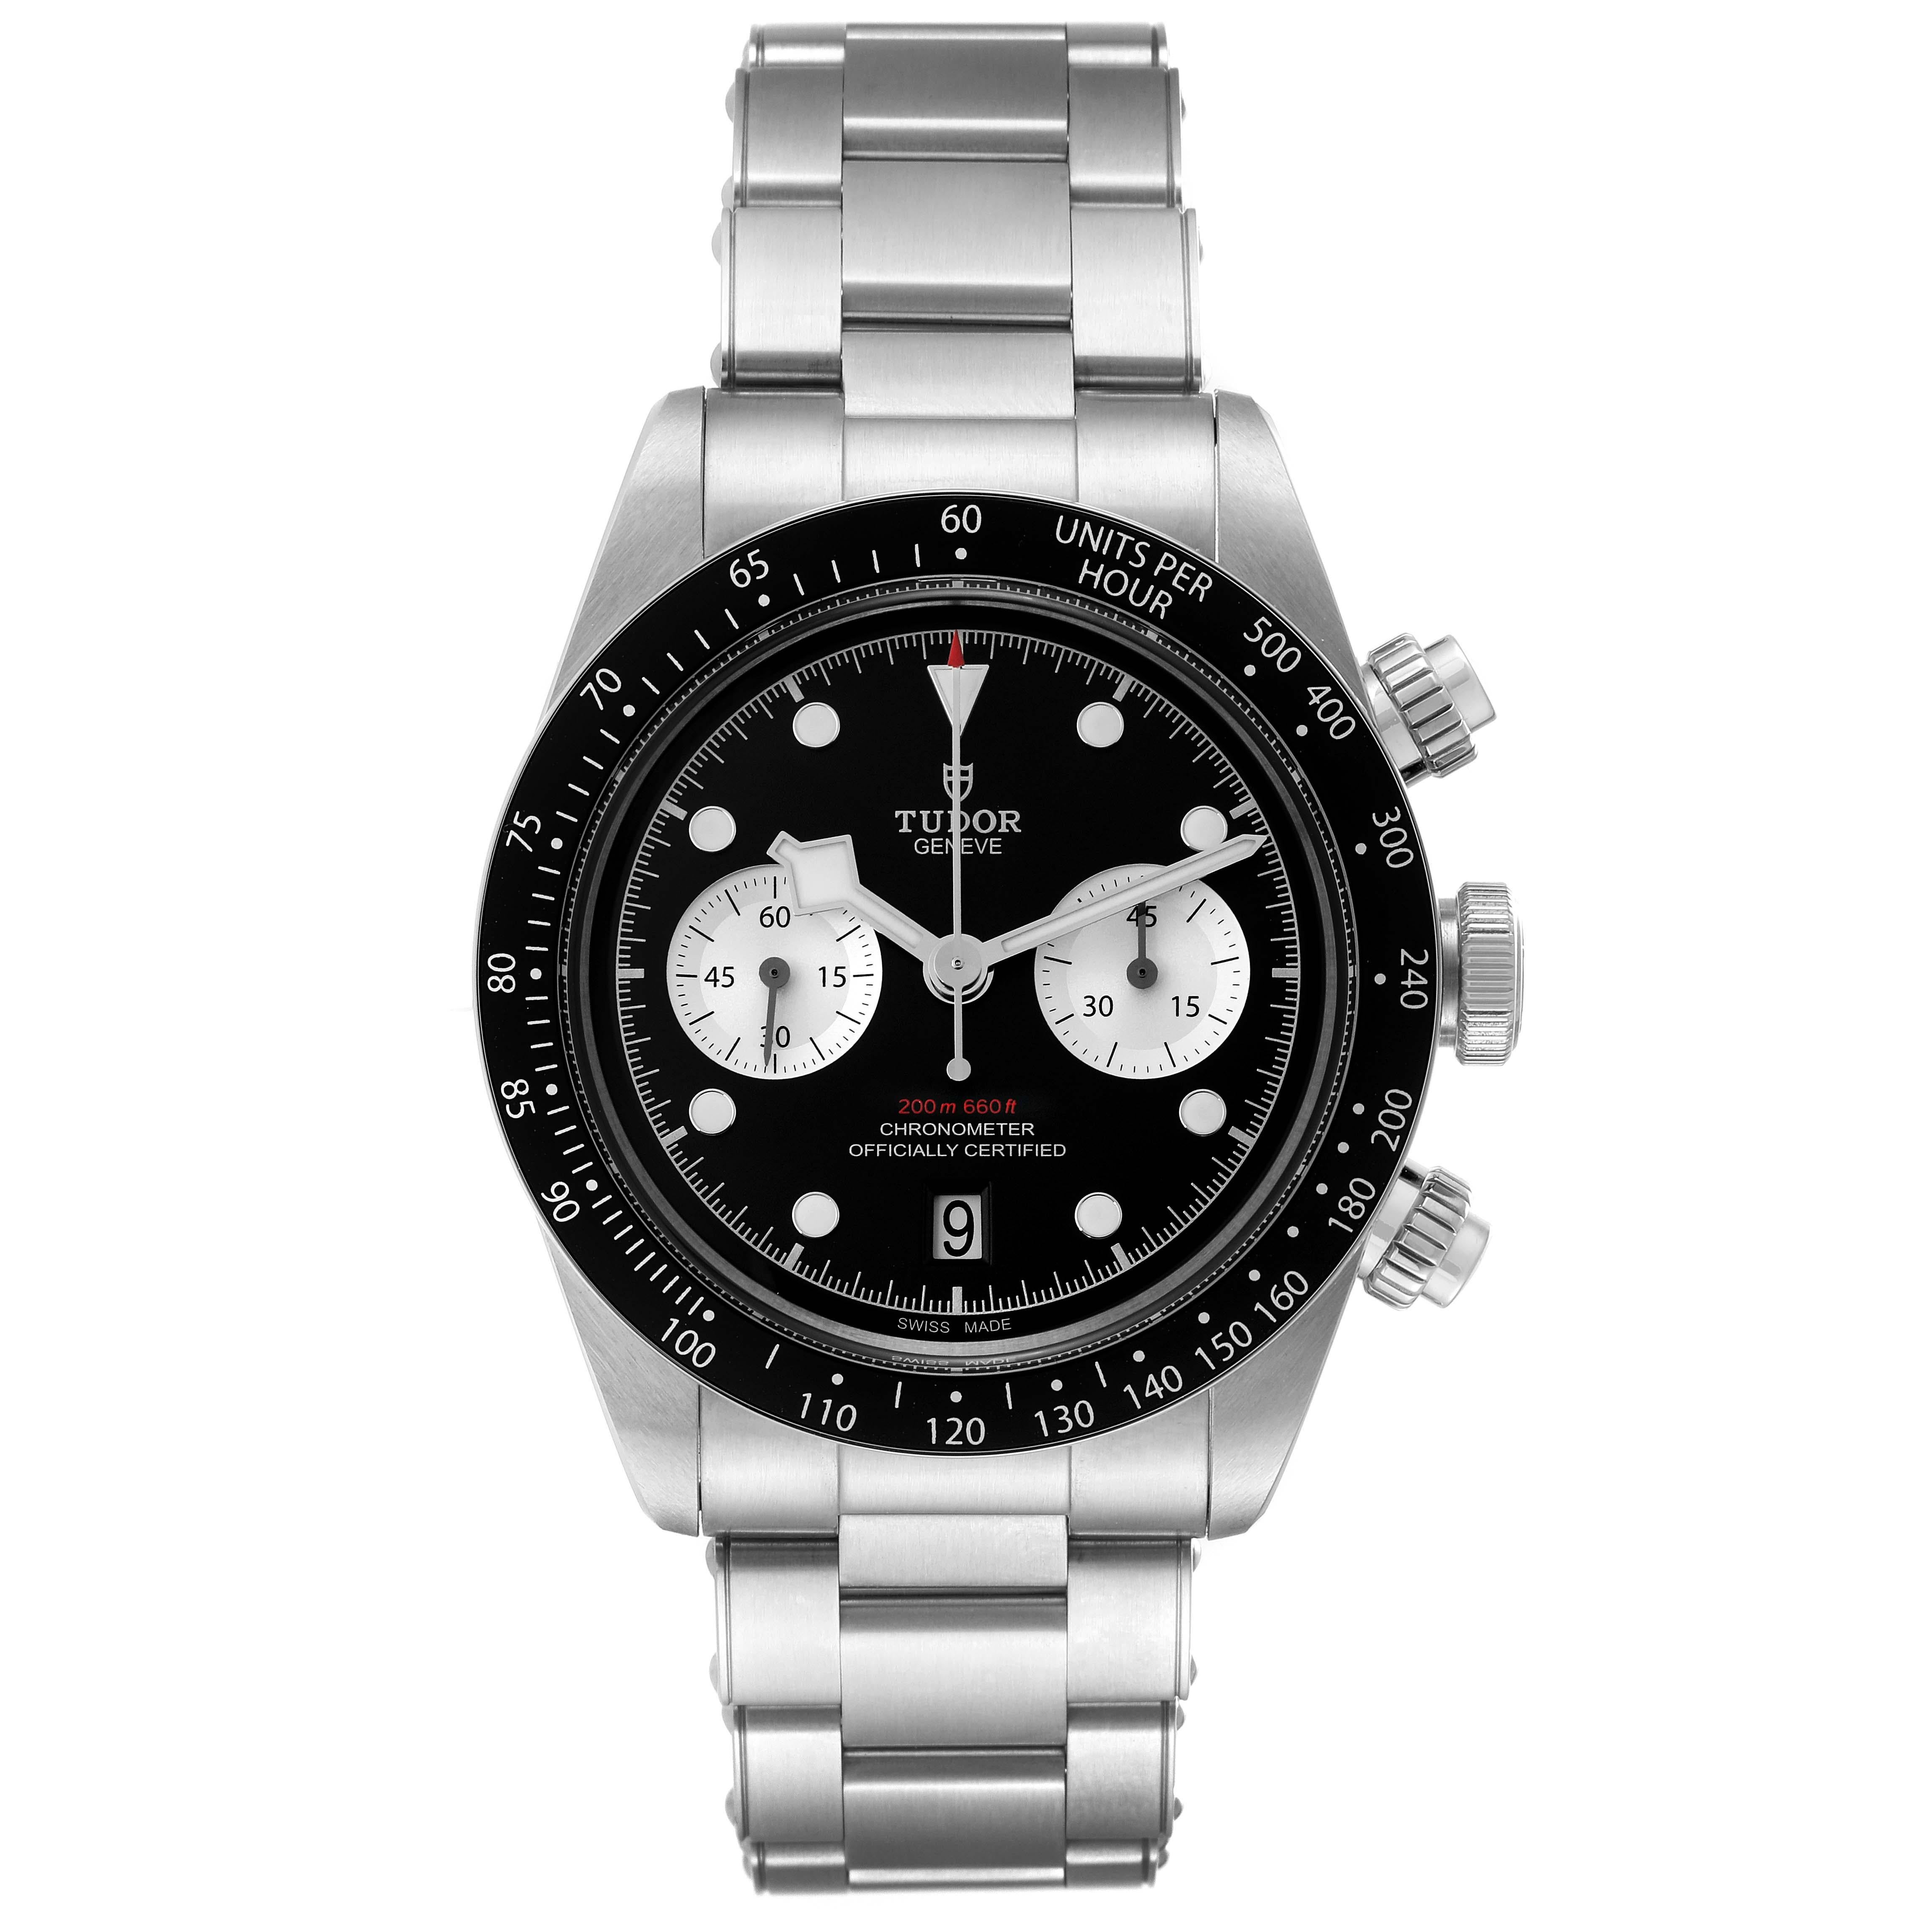 Tudor Black Bay Chronograph Reverse Panda Dial Steel Mens Watch 79360 Box Card. Automatic self-winding chronograph movement. Stainless steel oyster case 41 mm in diameter. Tudor logo on the crown. Black bezel insert with tachymeter scale. Scratch